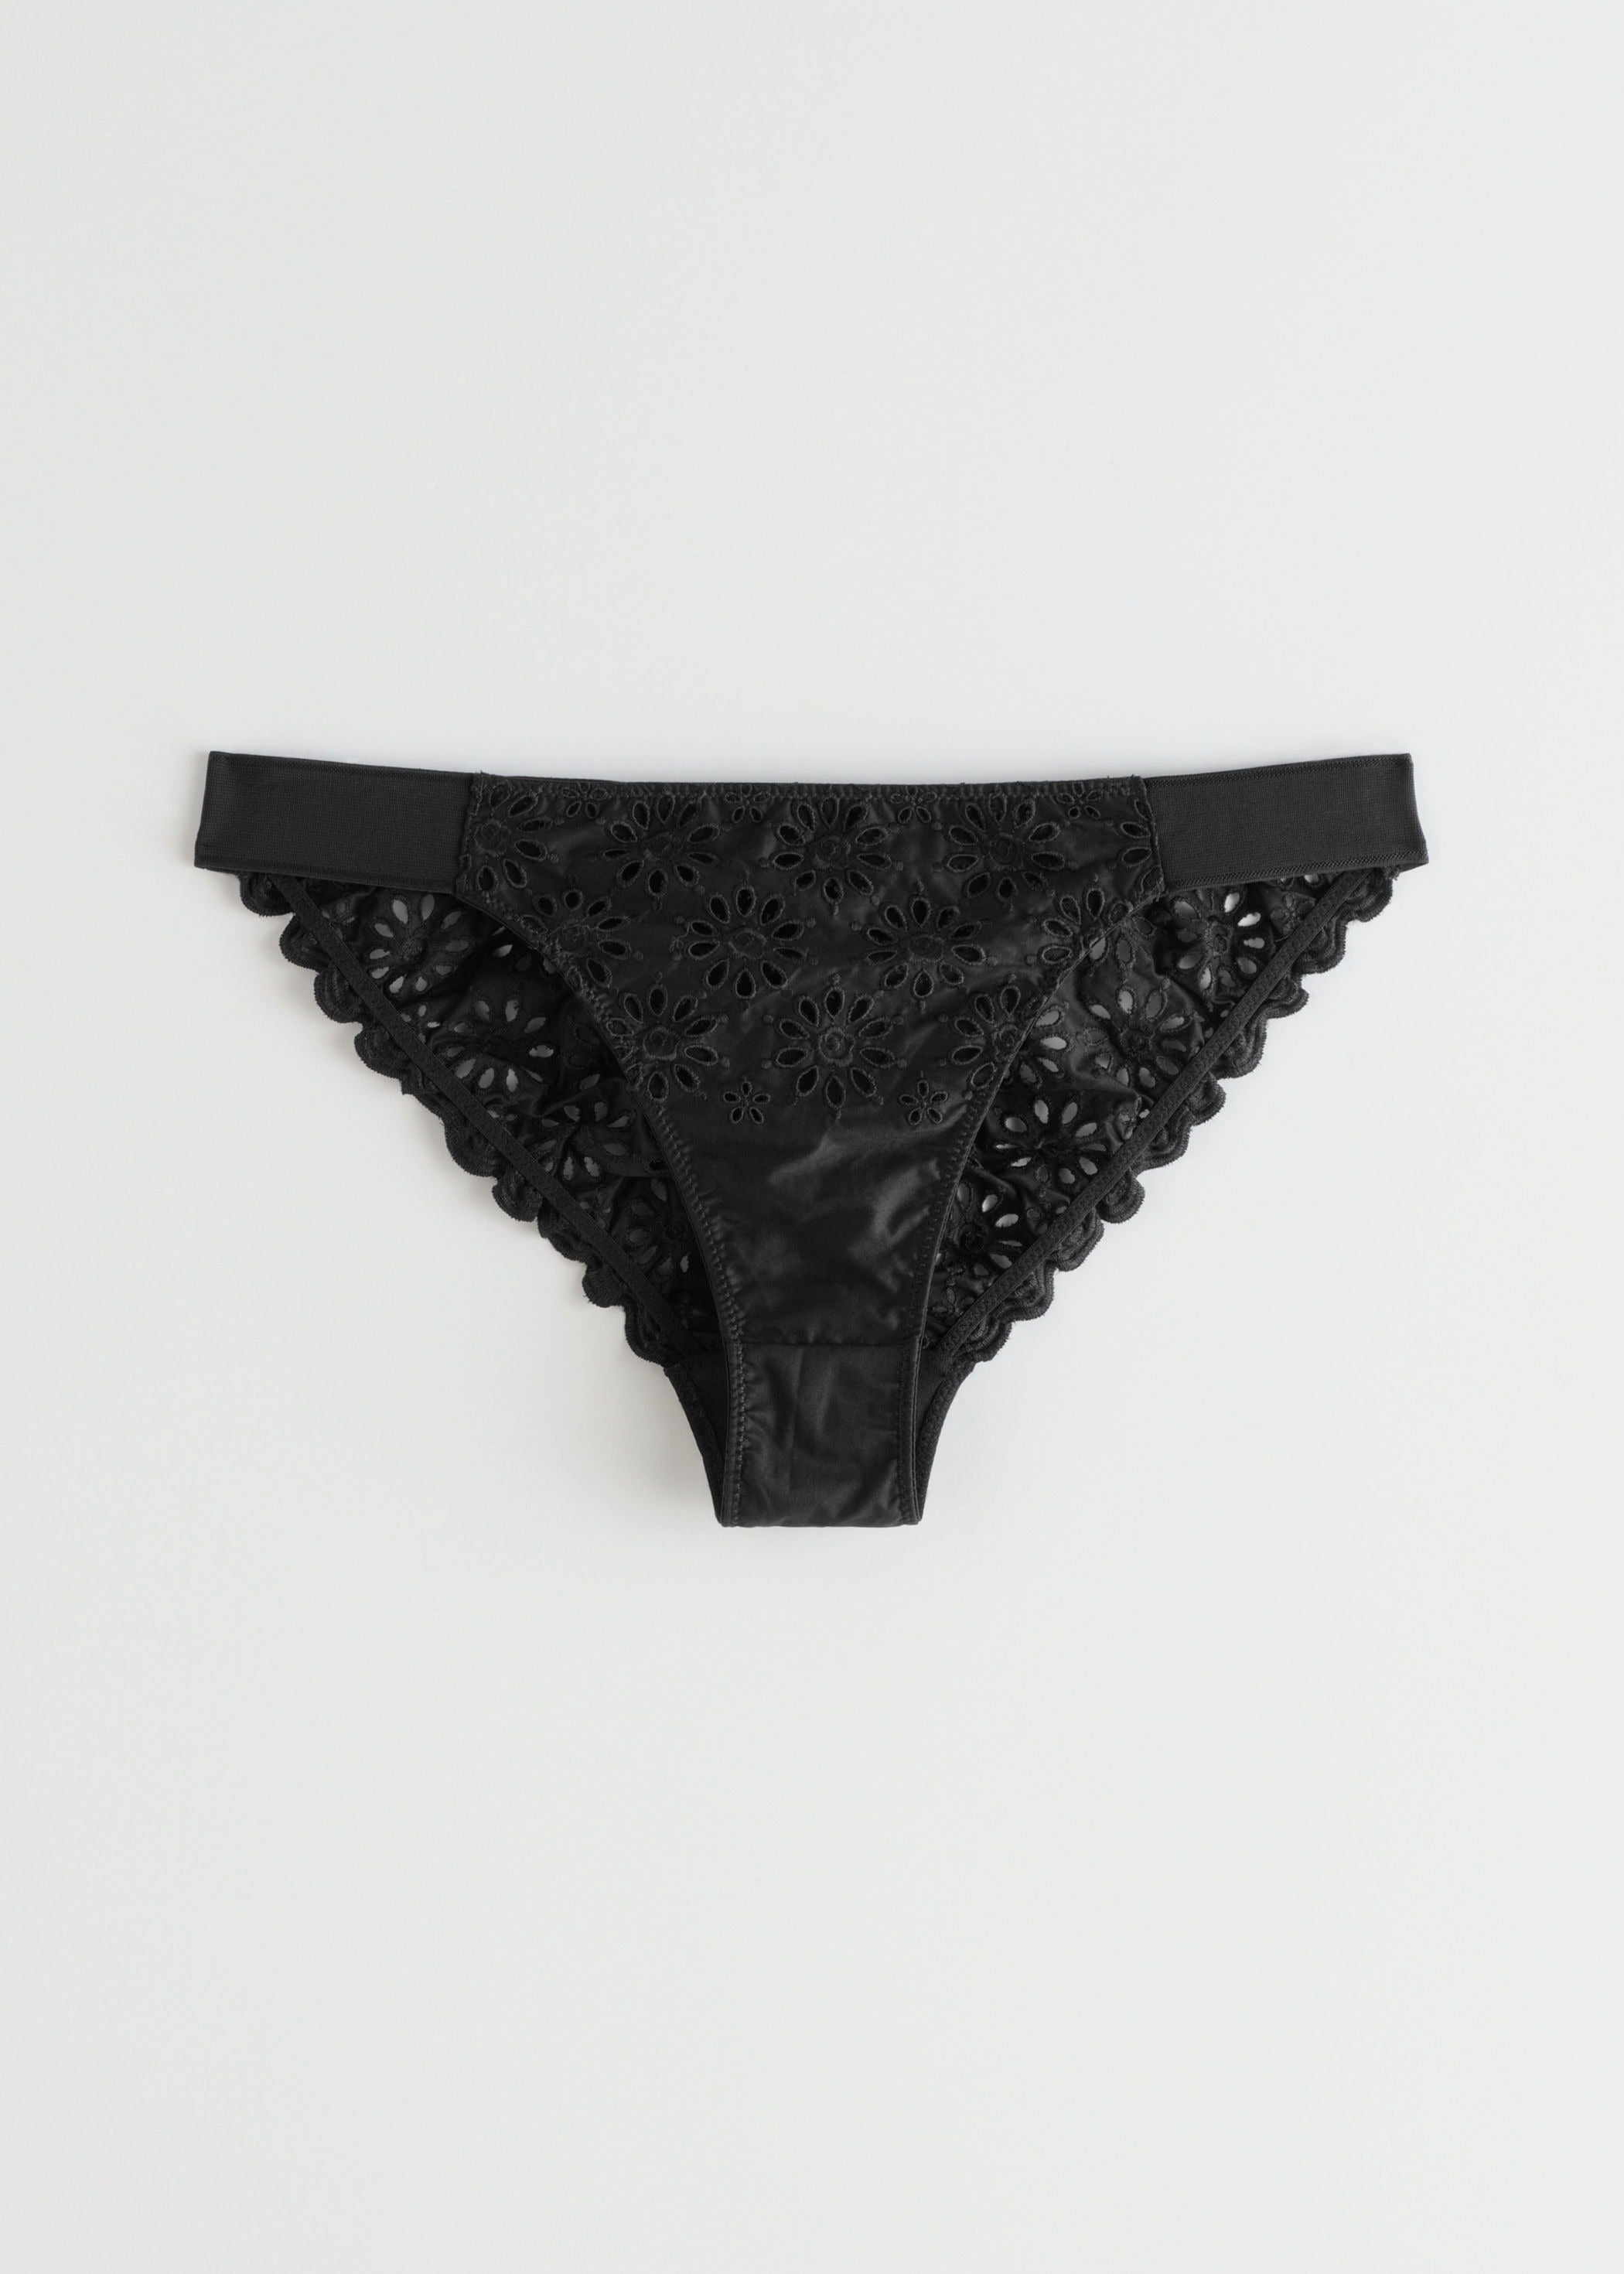 & Other Stories + Eyelet Embroidered Briefs